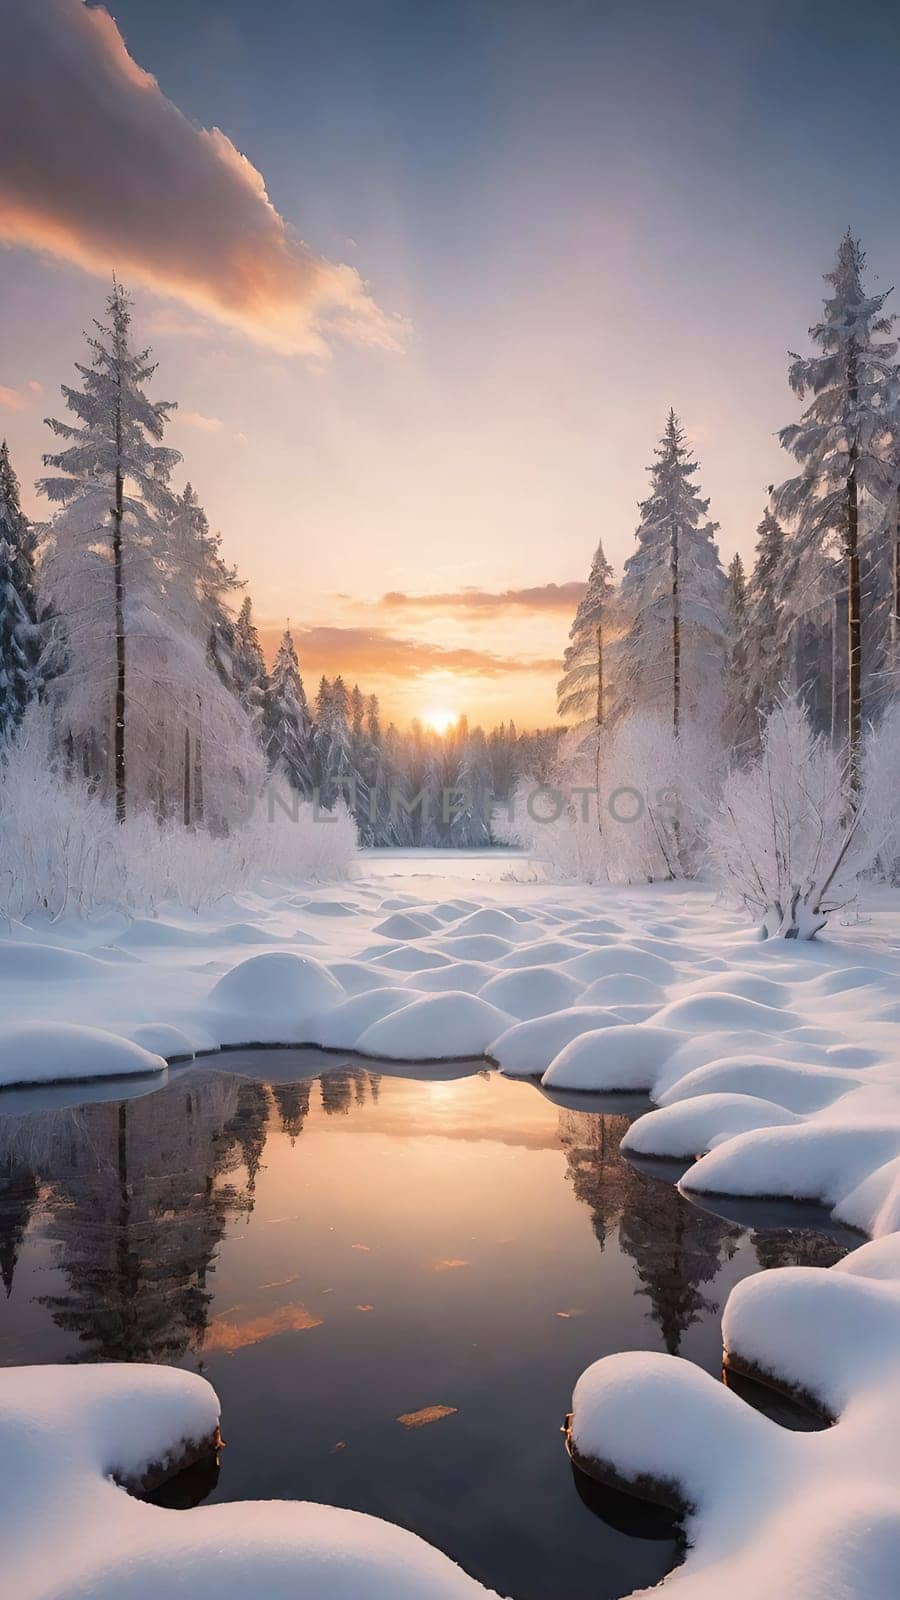 Winter landscape with snow covered trees and river at sunset. Beautiful winter landscape with frozen river and snow covered trees at sunset.Sunset on the river in winter forest. Beautiful winter landscape.Fantastic winter landscape with snow covered trees and river at sunset.